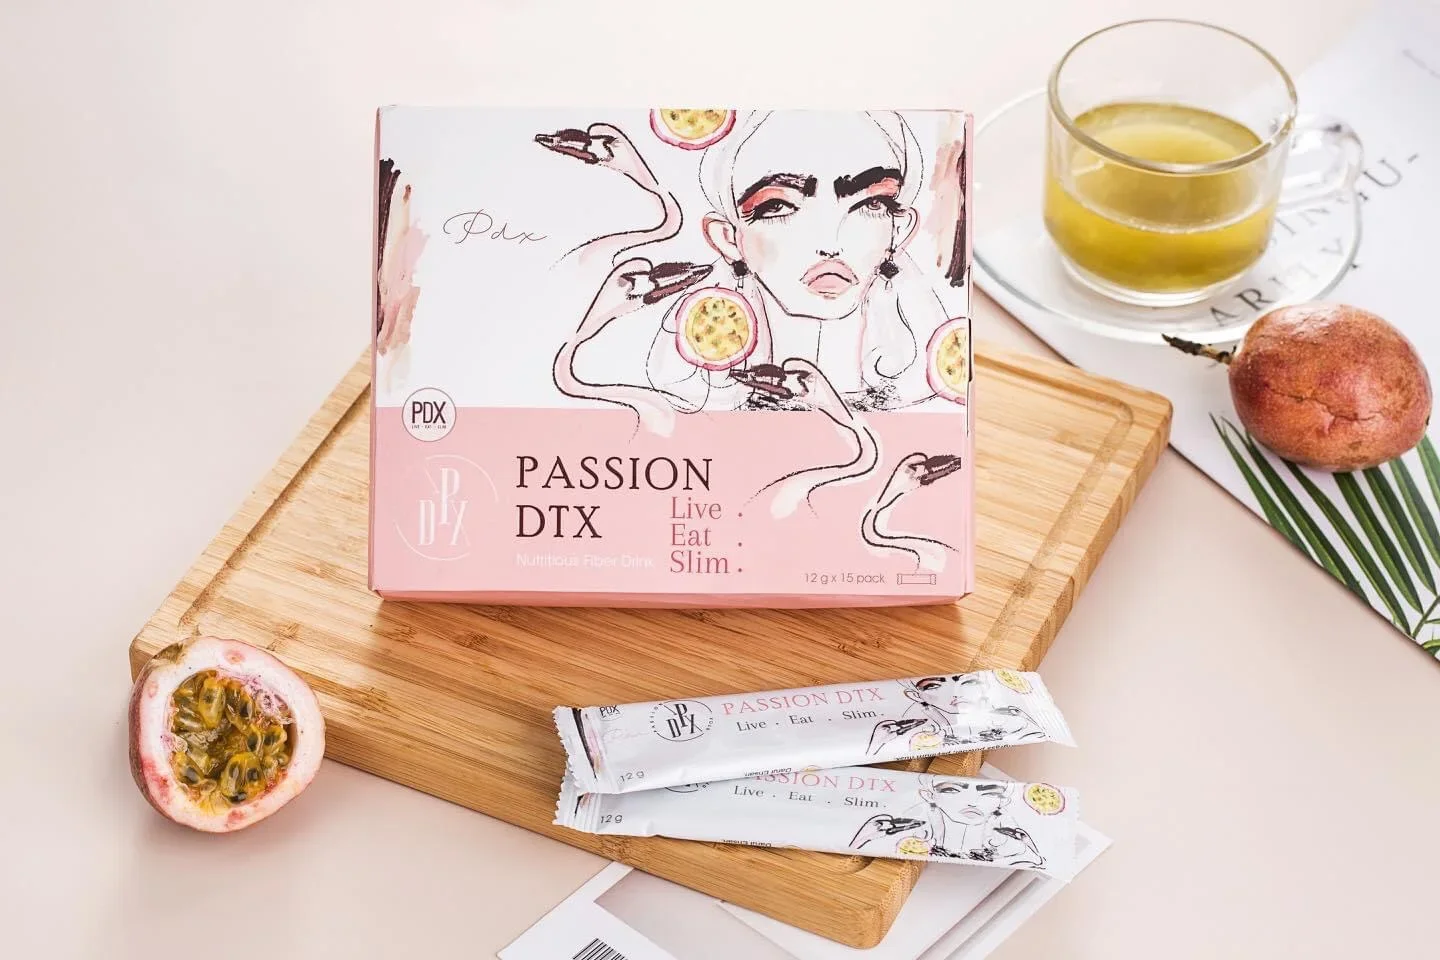 Passion detox PDX [2020 limited edition] Passion Dtox 排毒